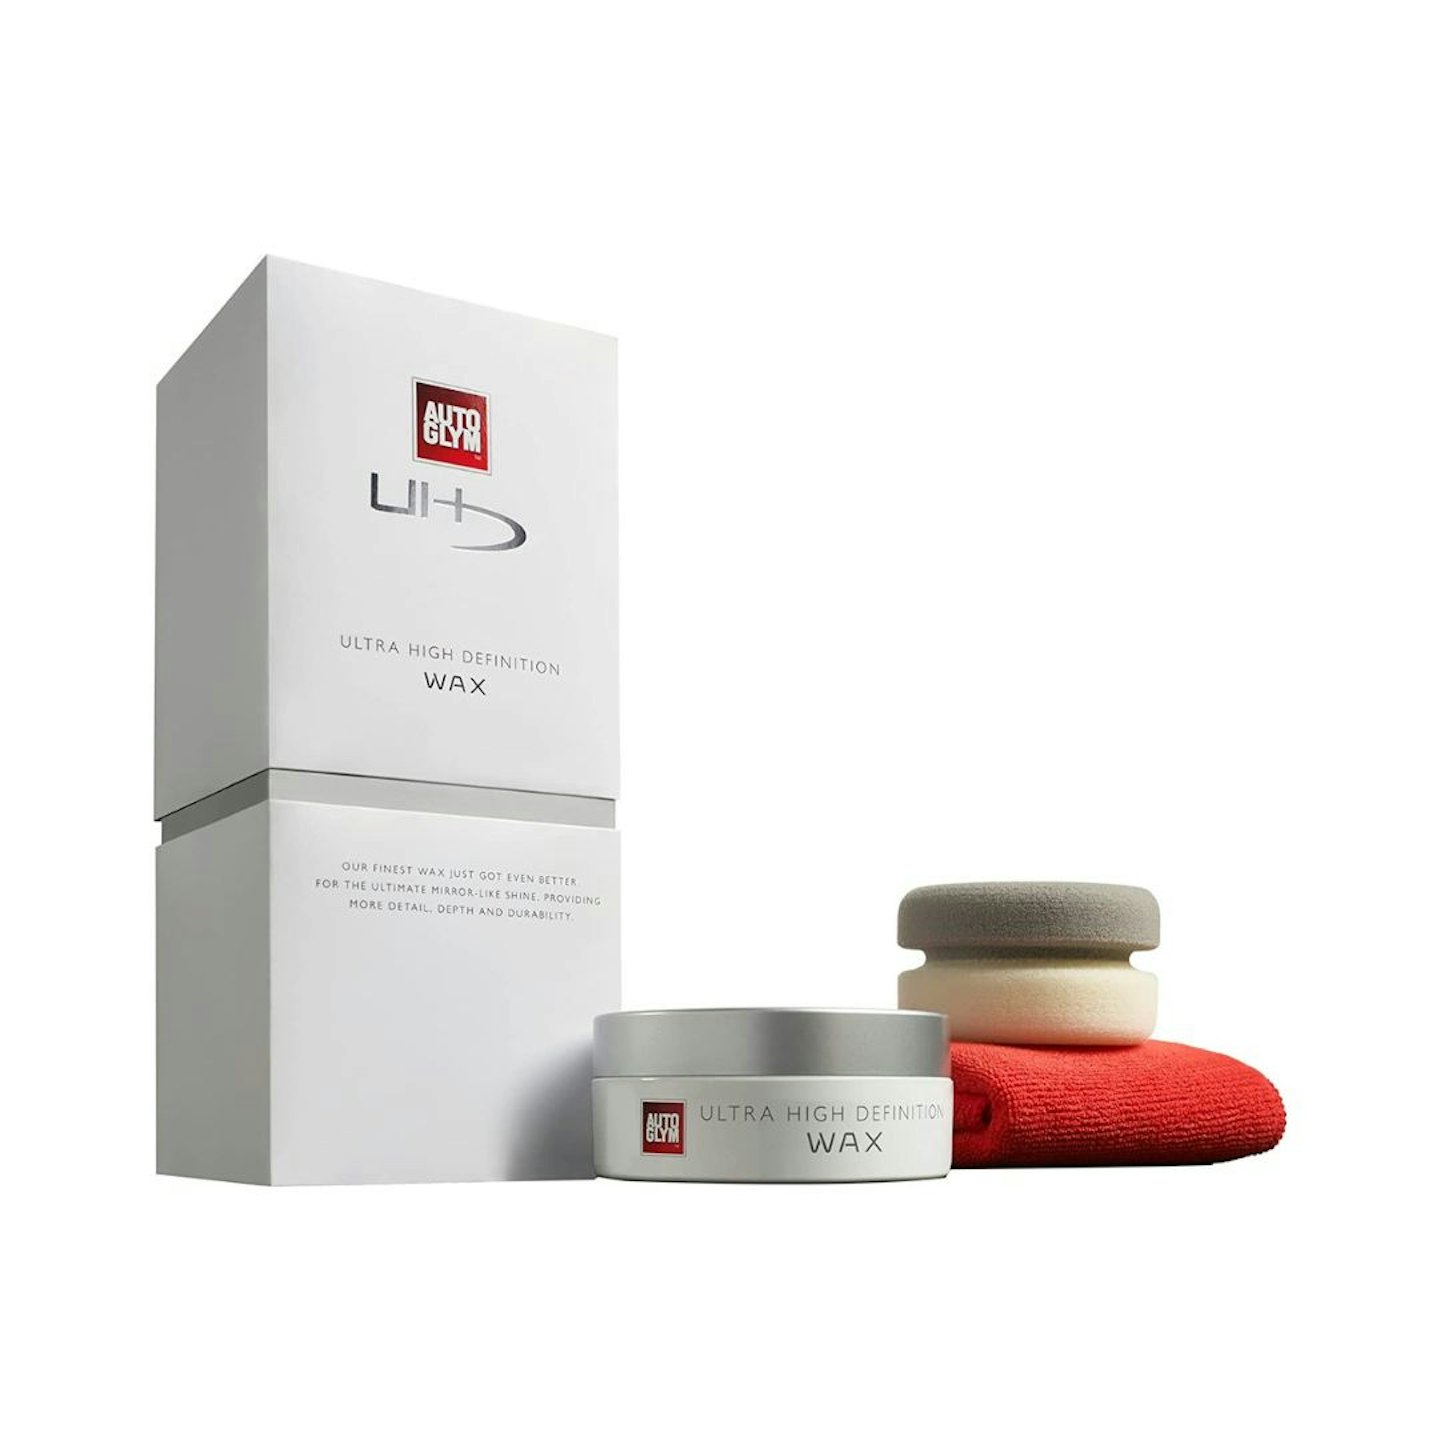 Autoglym Ultra High Definition Shampoo: Tested And Reviewed - Prep